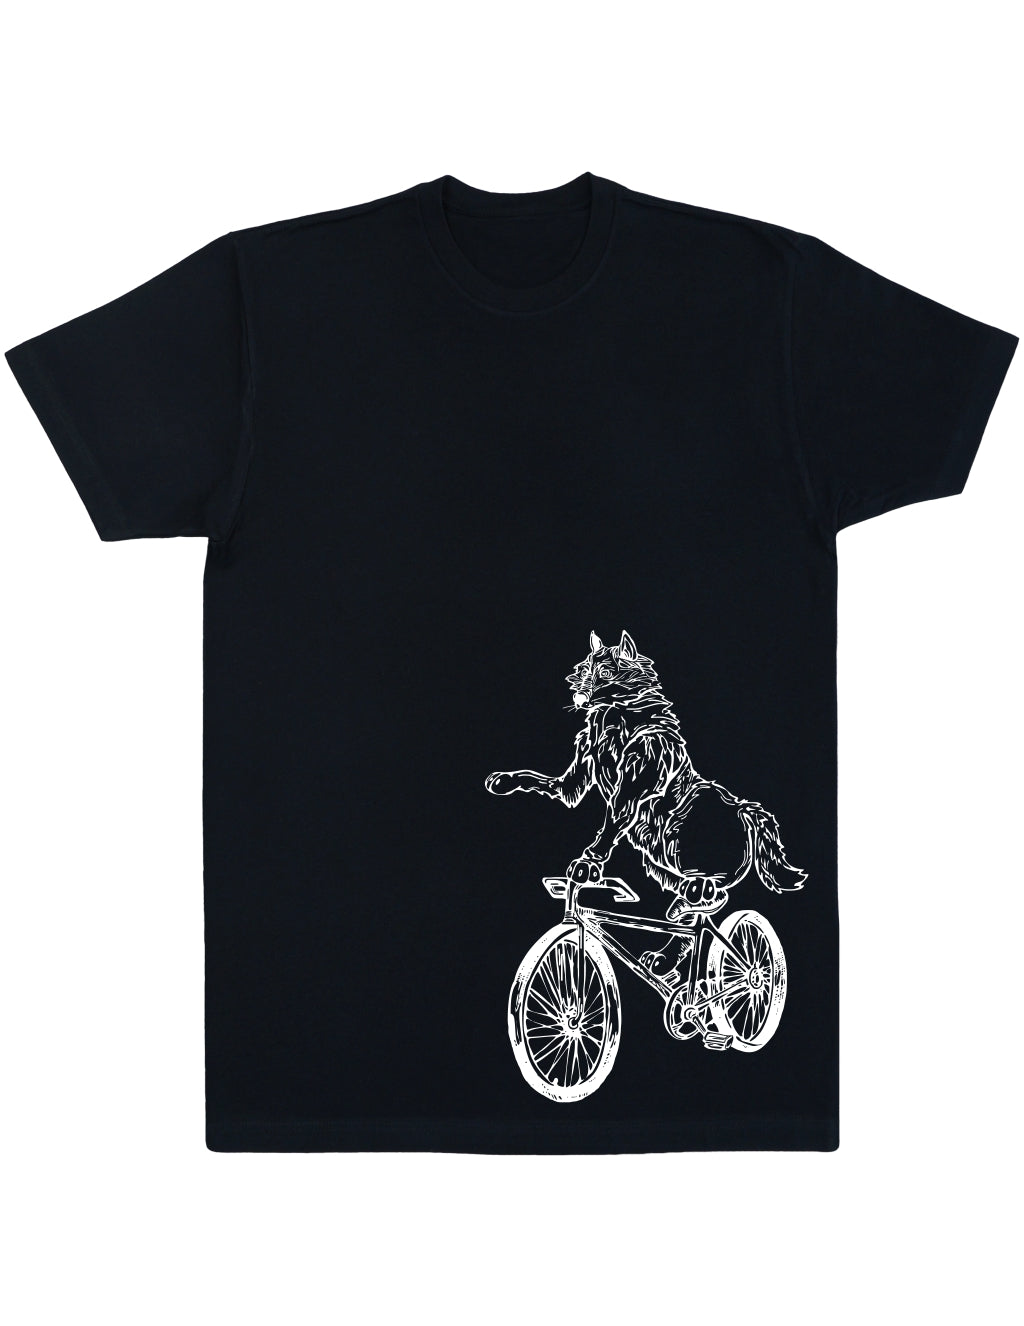 SEEMBO Wolf Cycling Bicycle Men's Cotton T-Shirt Side Print